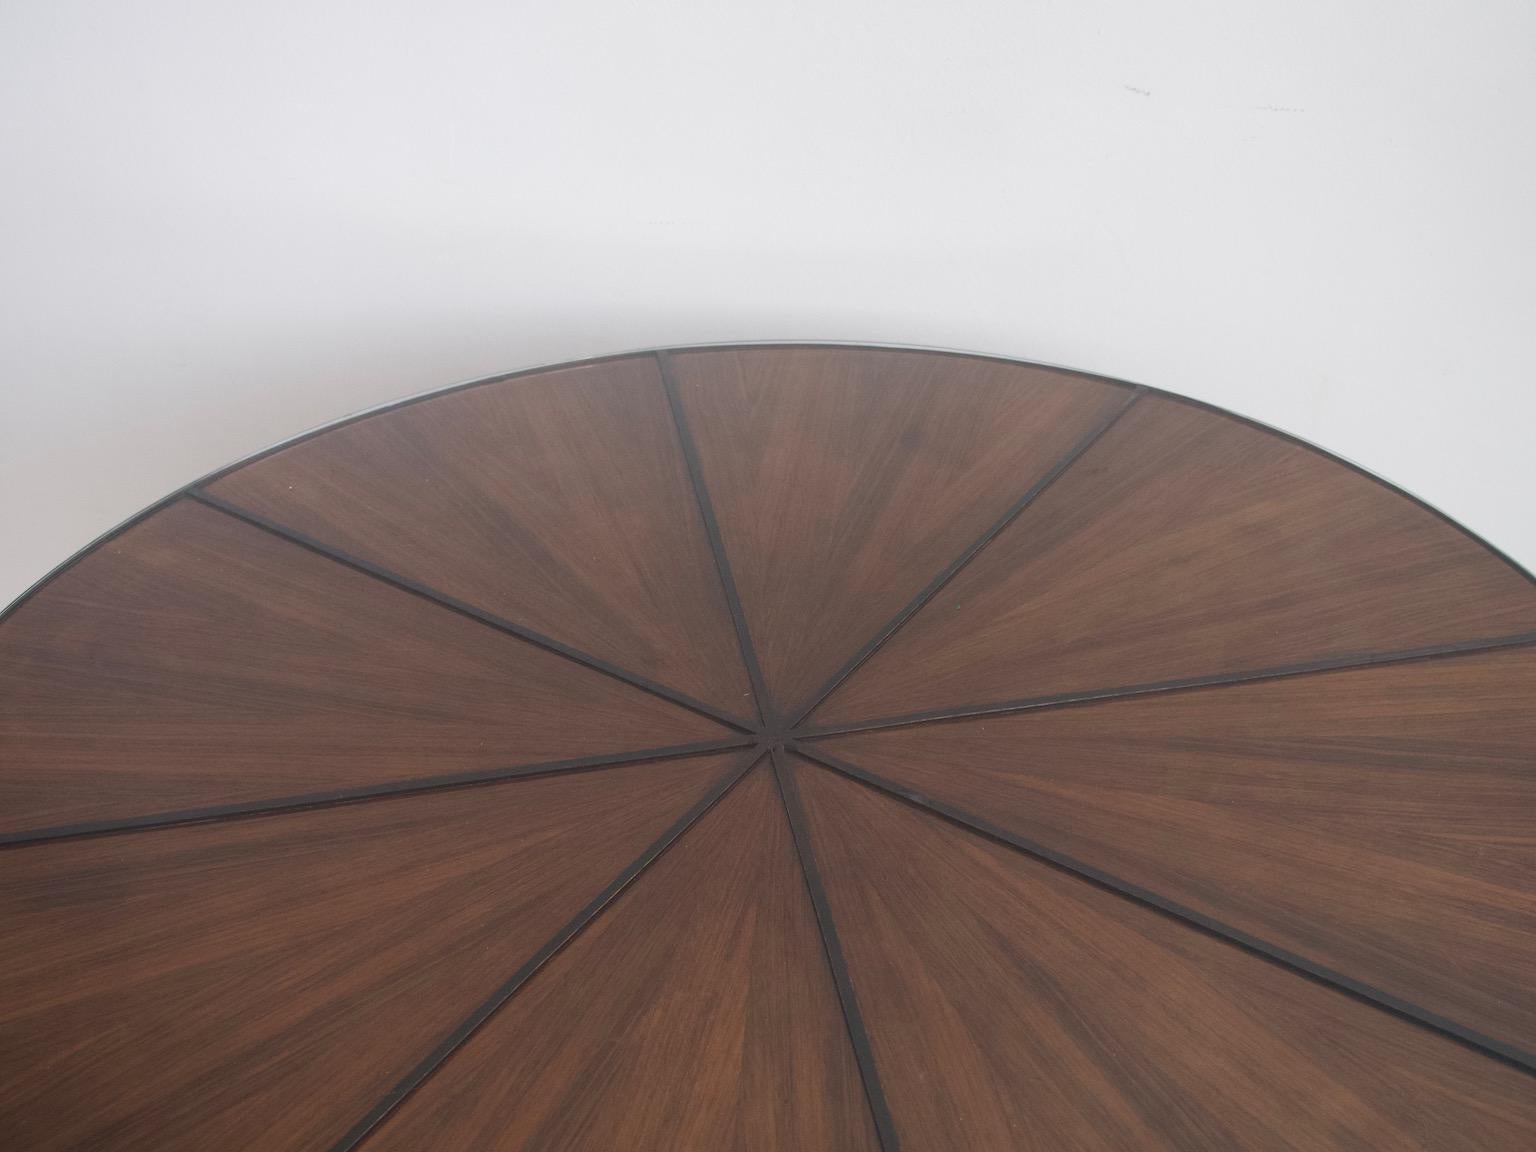 20th Century Italian Round Wooden Dining Table with Glass Top